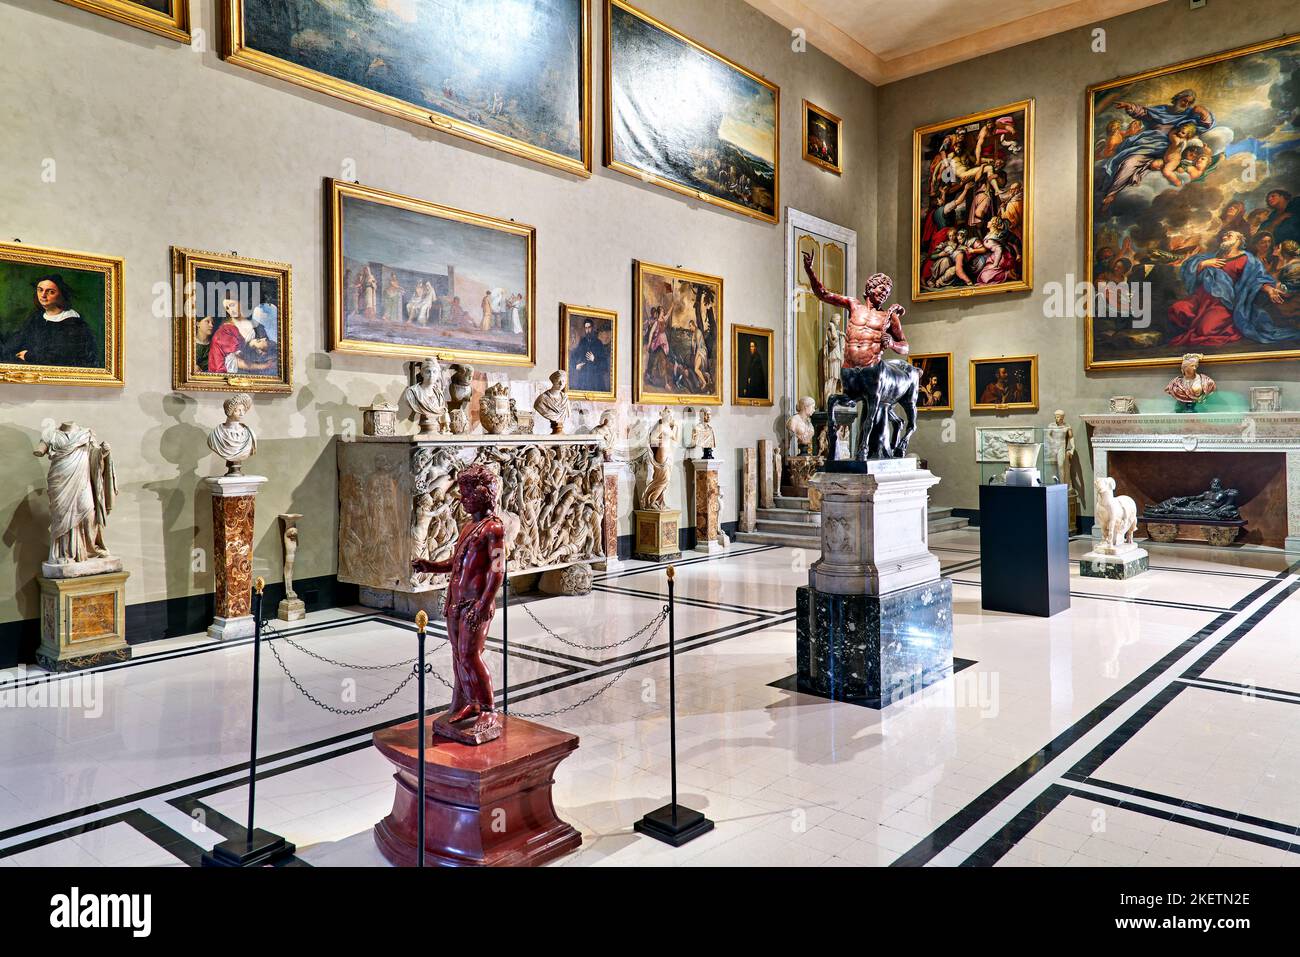 Rome Lazio Italy. The Doria Pamphilj Gallery is a large art collection housed in the Palazzo Doria Pamphilj Stock Photo